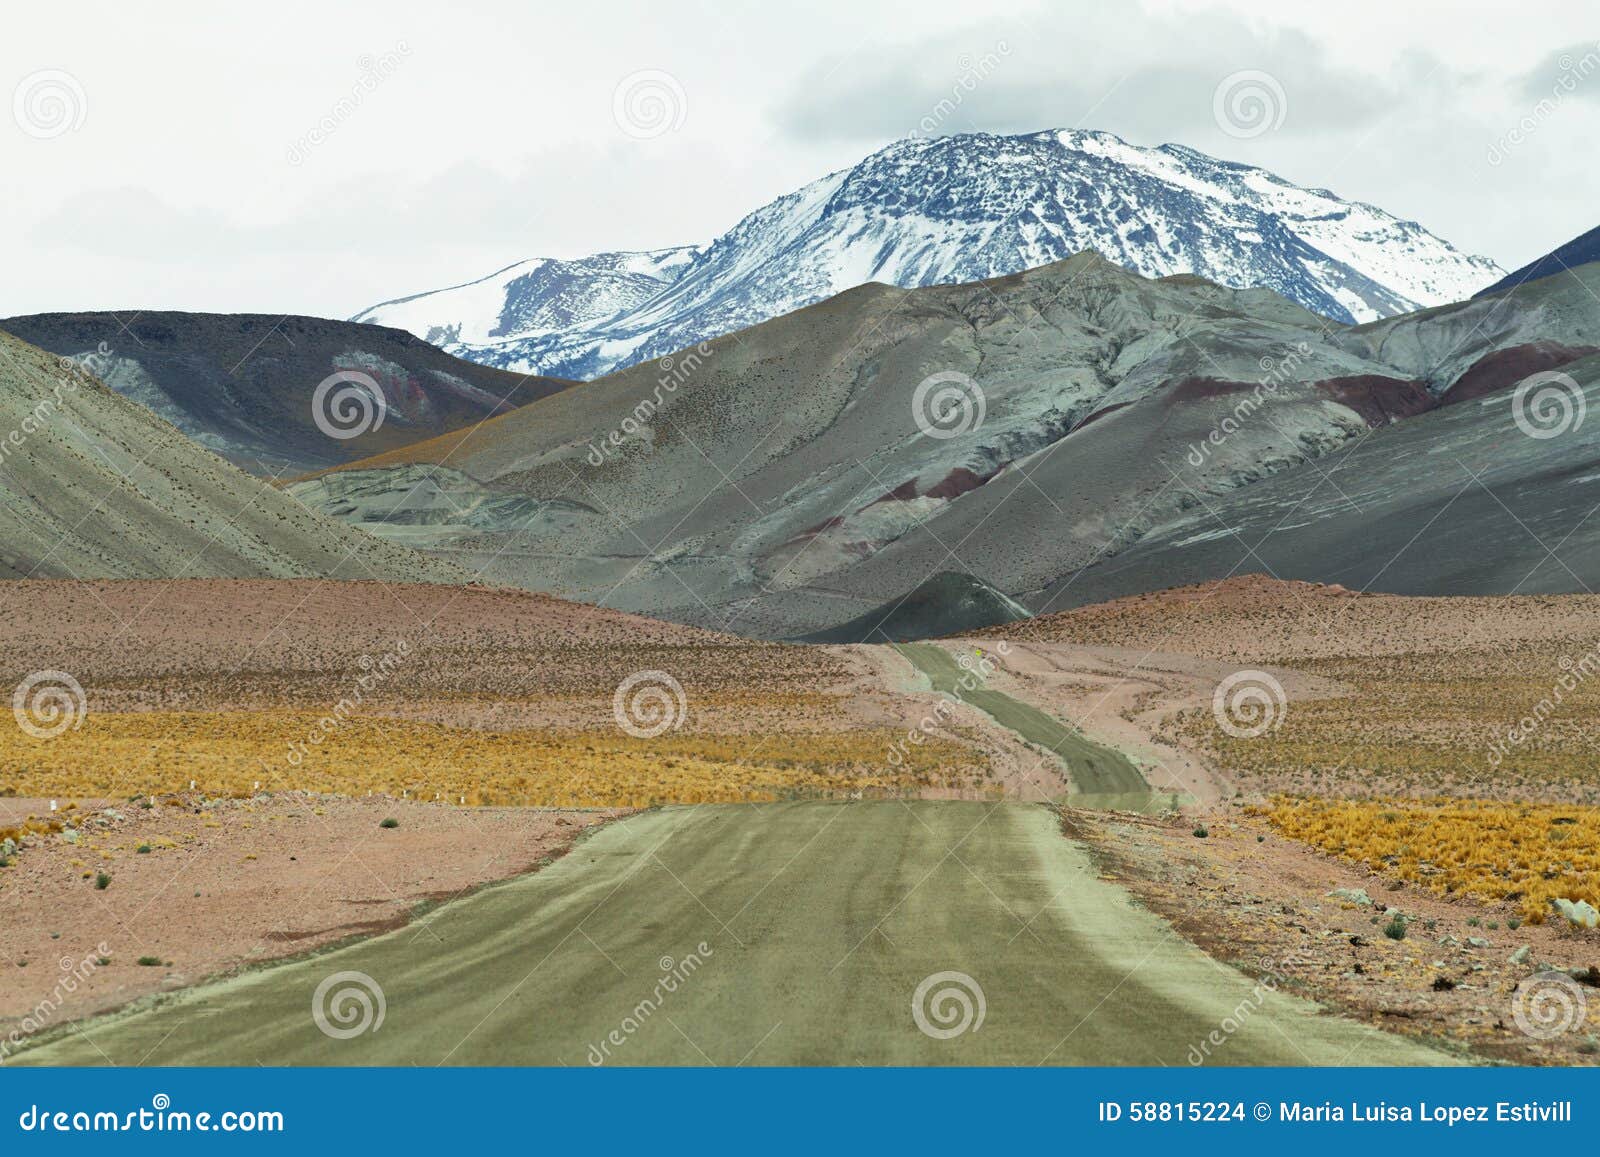 view of road and mountains in sico pass